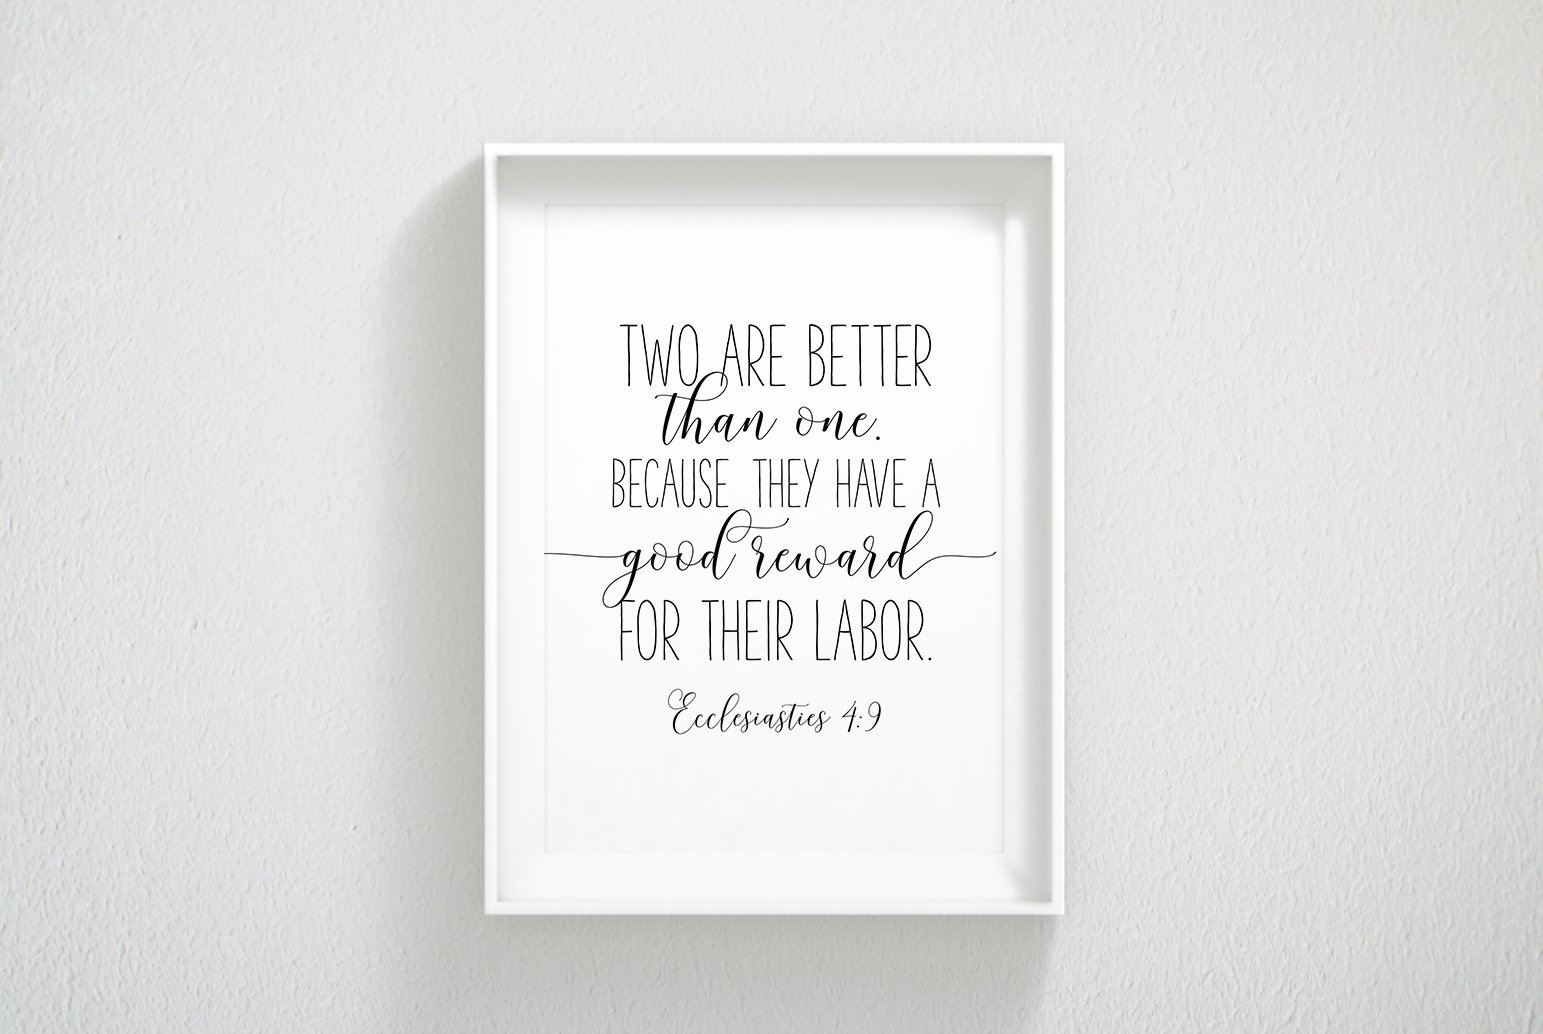 Two Are Better Than One, Ecclesiastes 4:9, Scripture Wall Art, Bible Verse Prints Wedding Gift